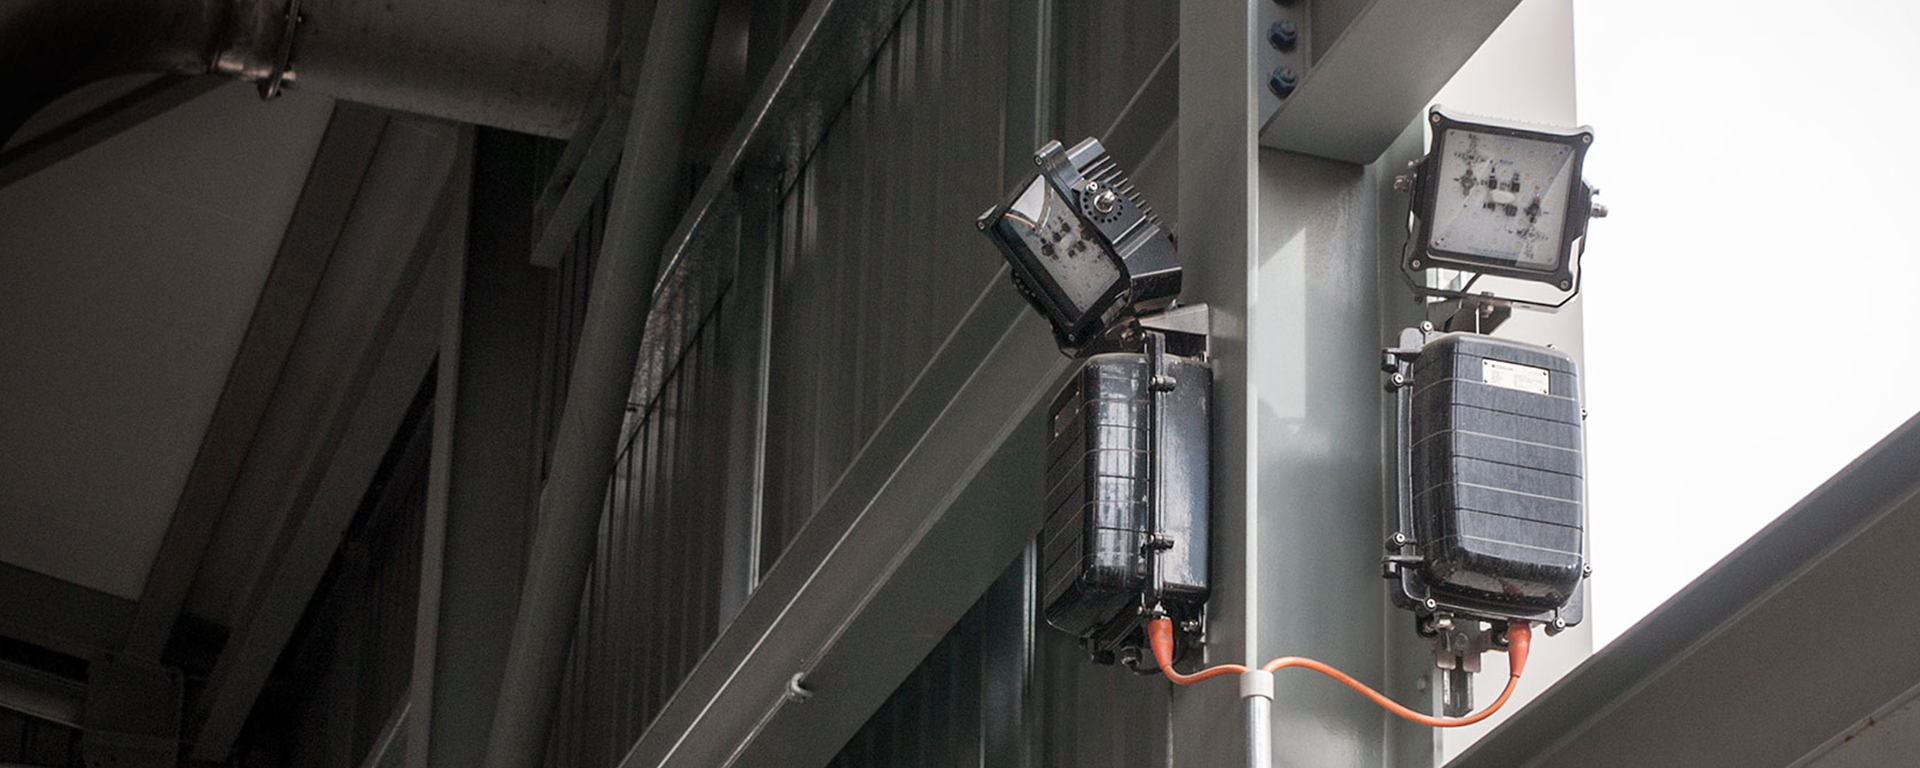 The Warden 140 has been designed to replace traditional Watchman’s found in various industrial applications.